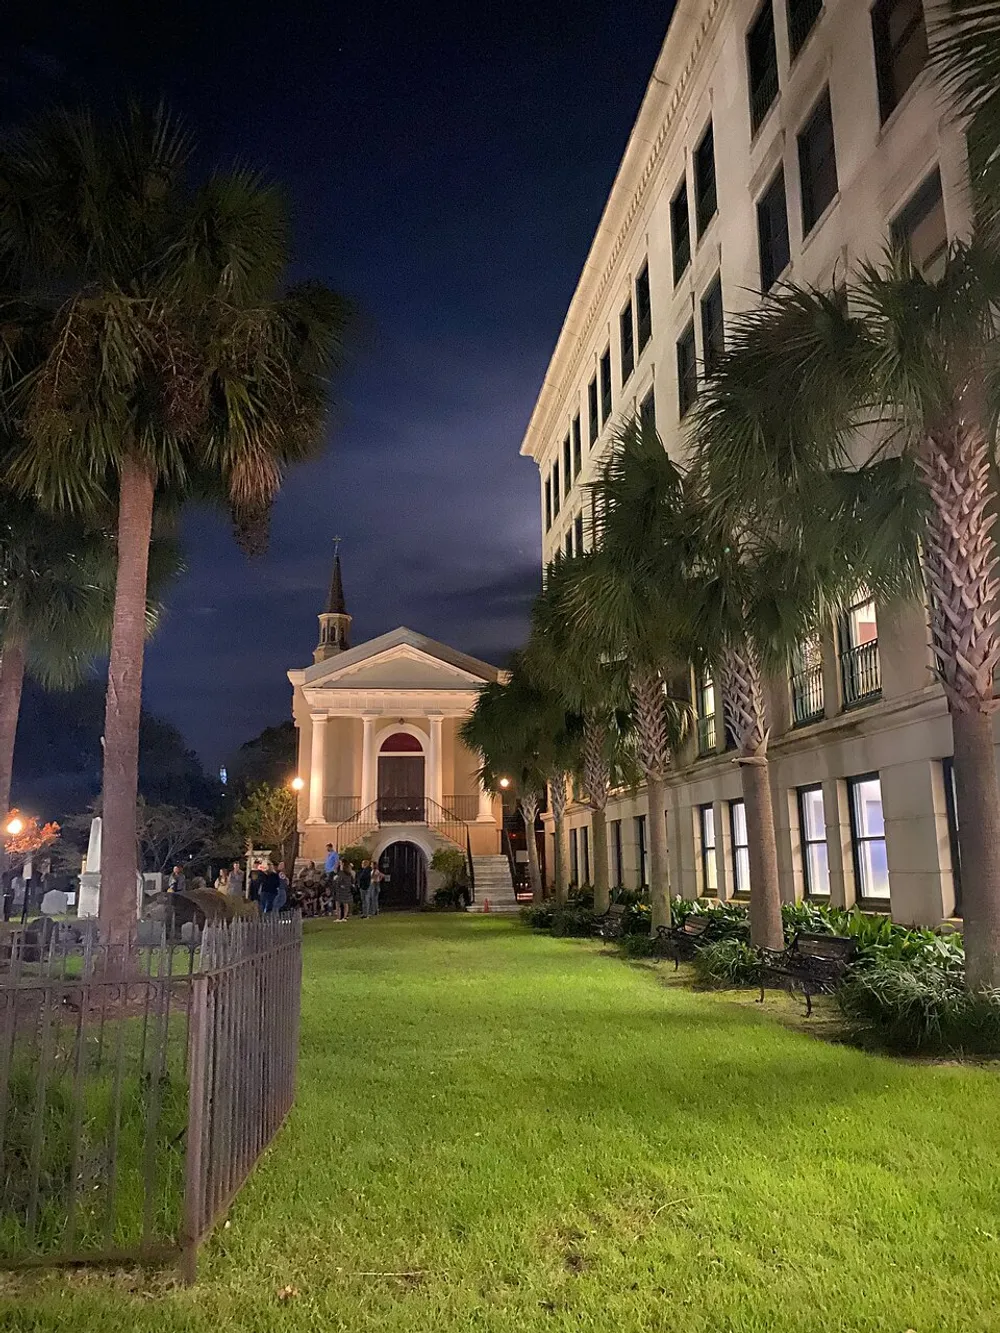 A nighttime view of a grand historic building possibly a church with people milling about flanked by tall palm trees and a deep blue sky